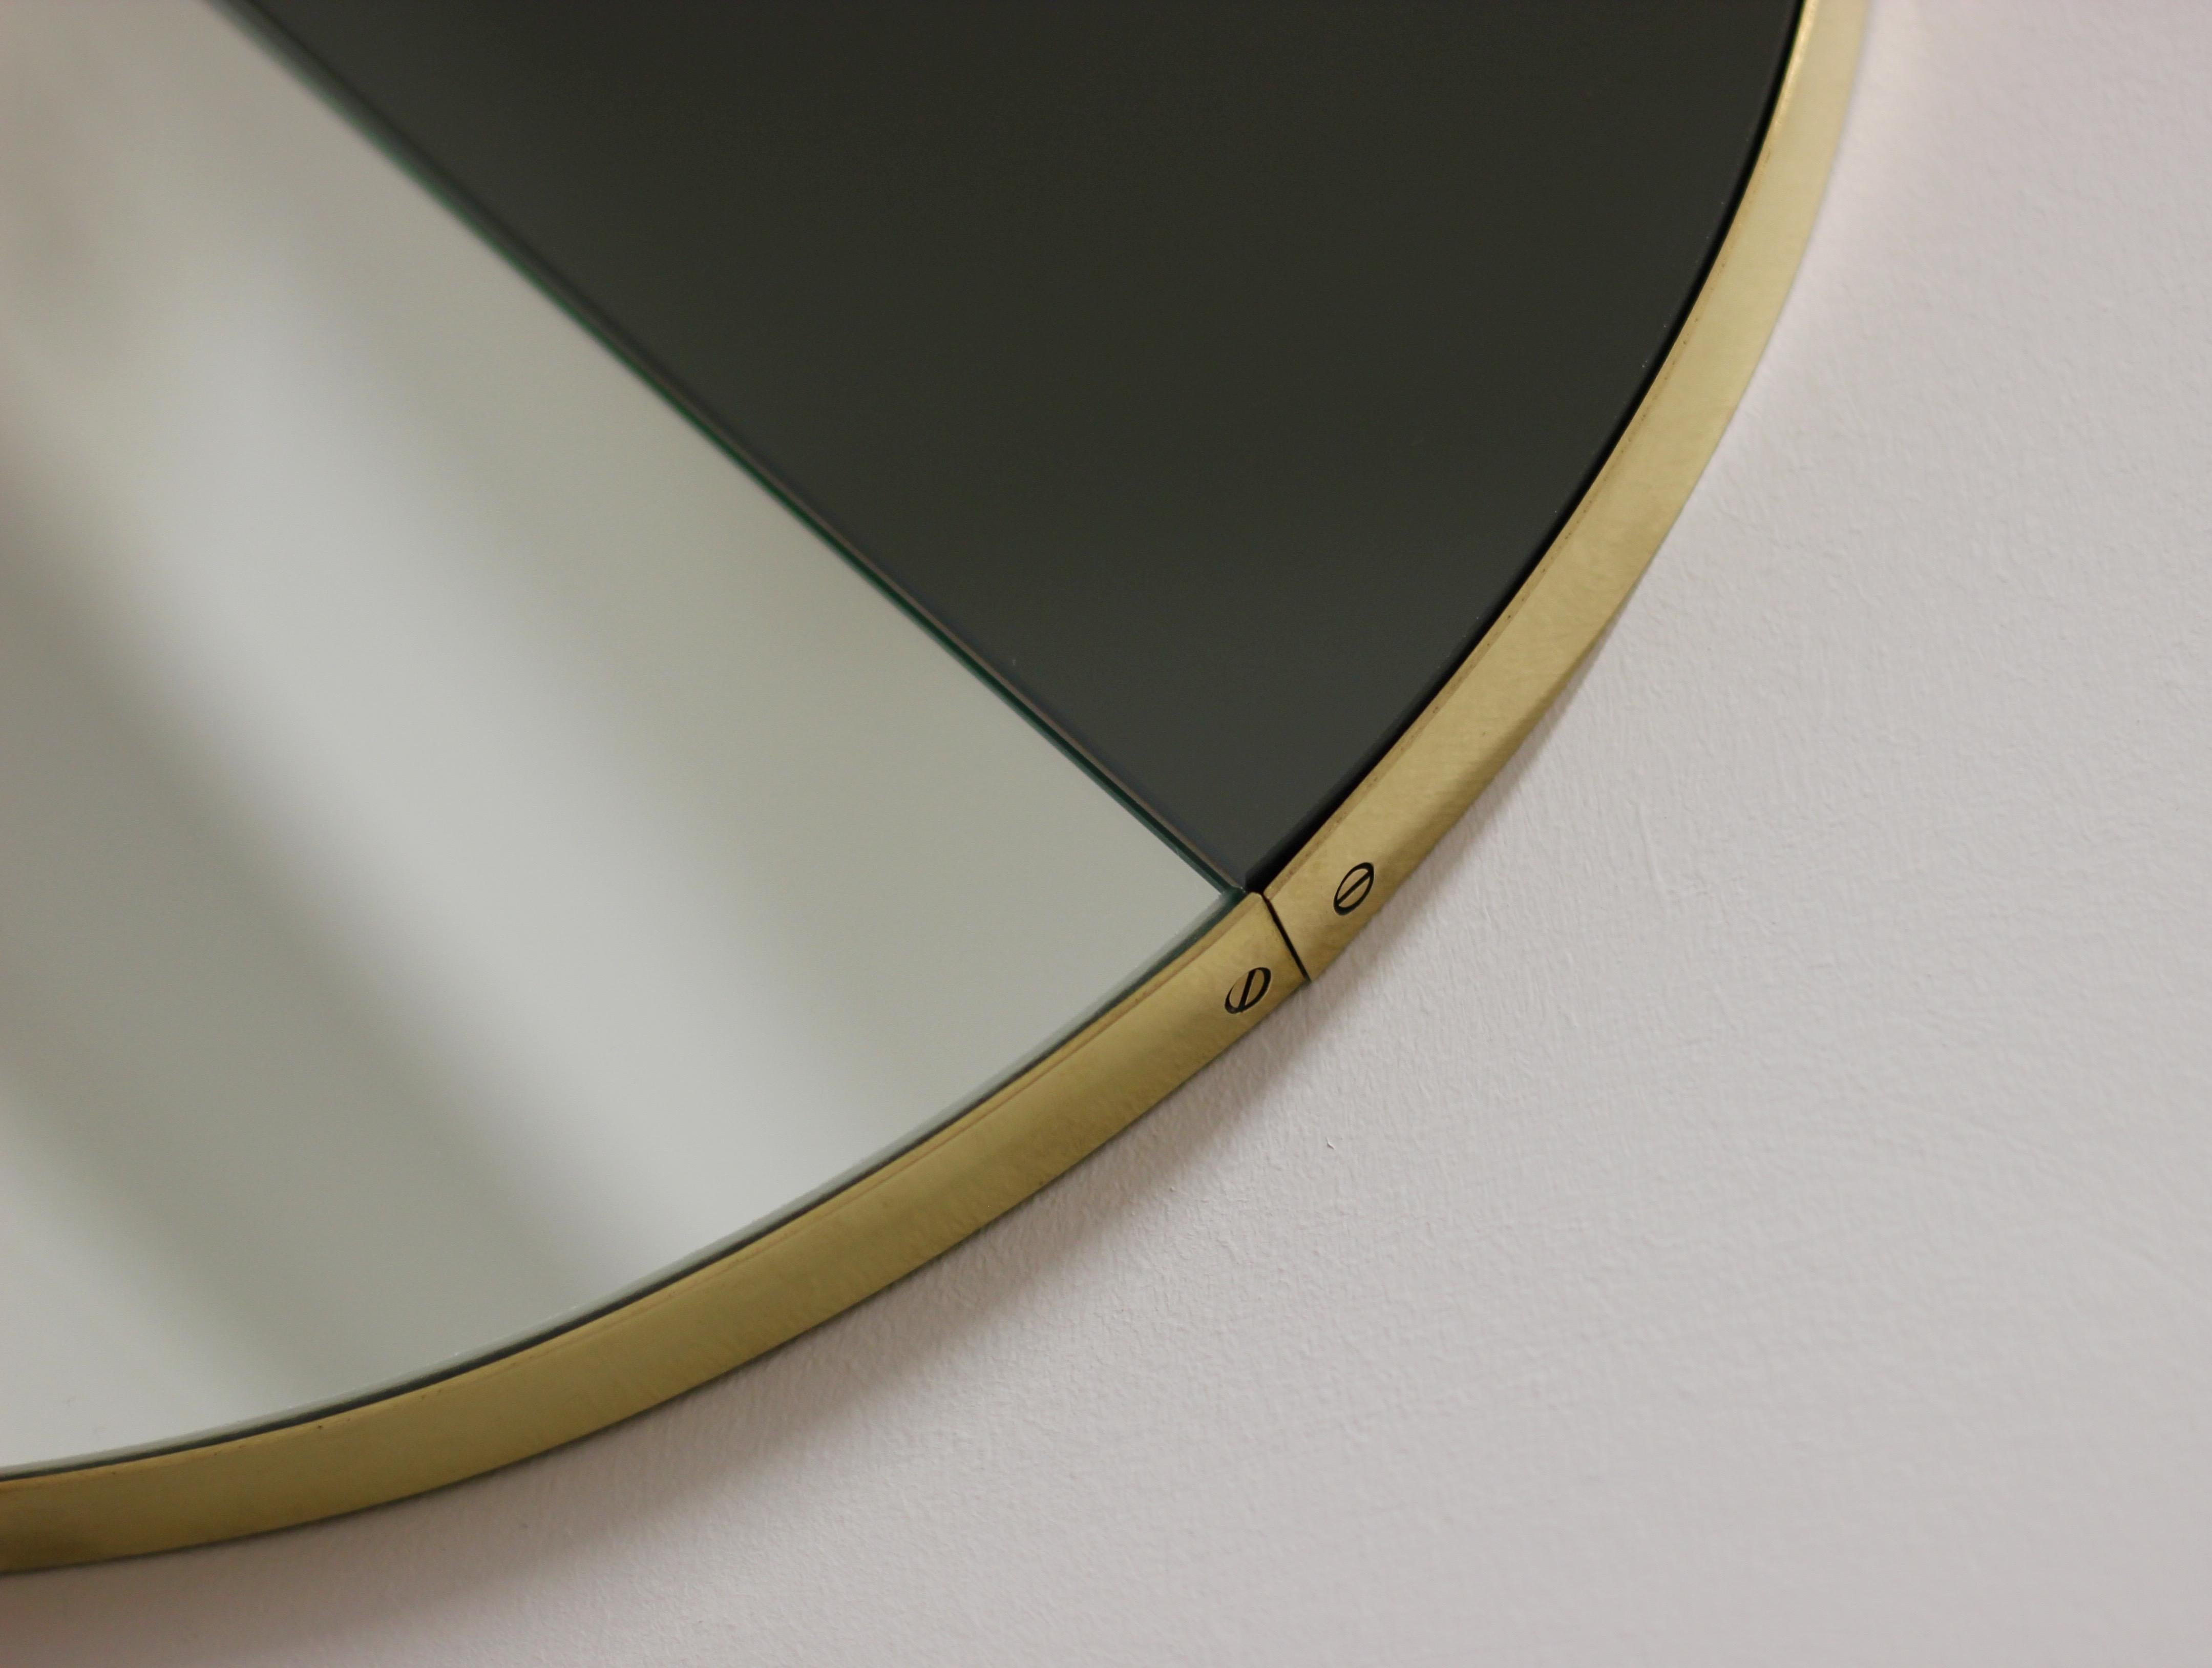 Orbis Dualis Mixed Tint Contemporary Round Mirror with Brass Frame, Large For Sale 2